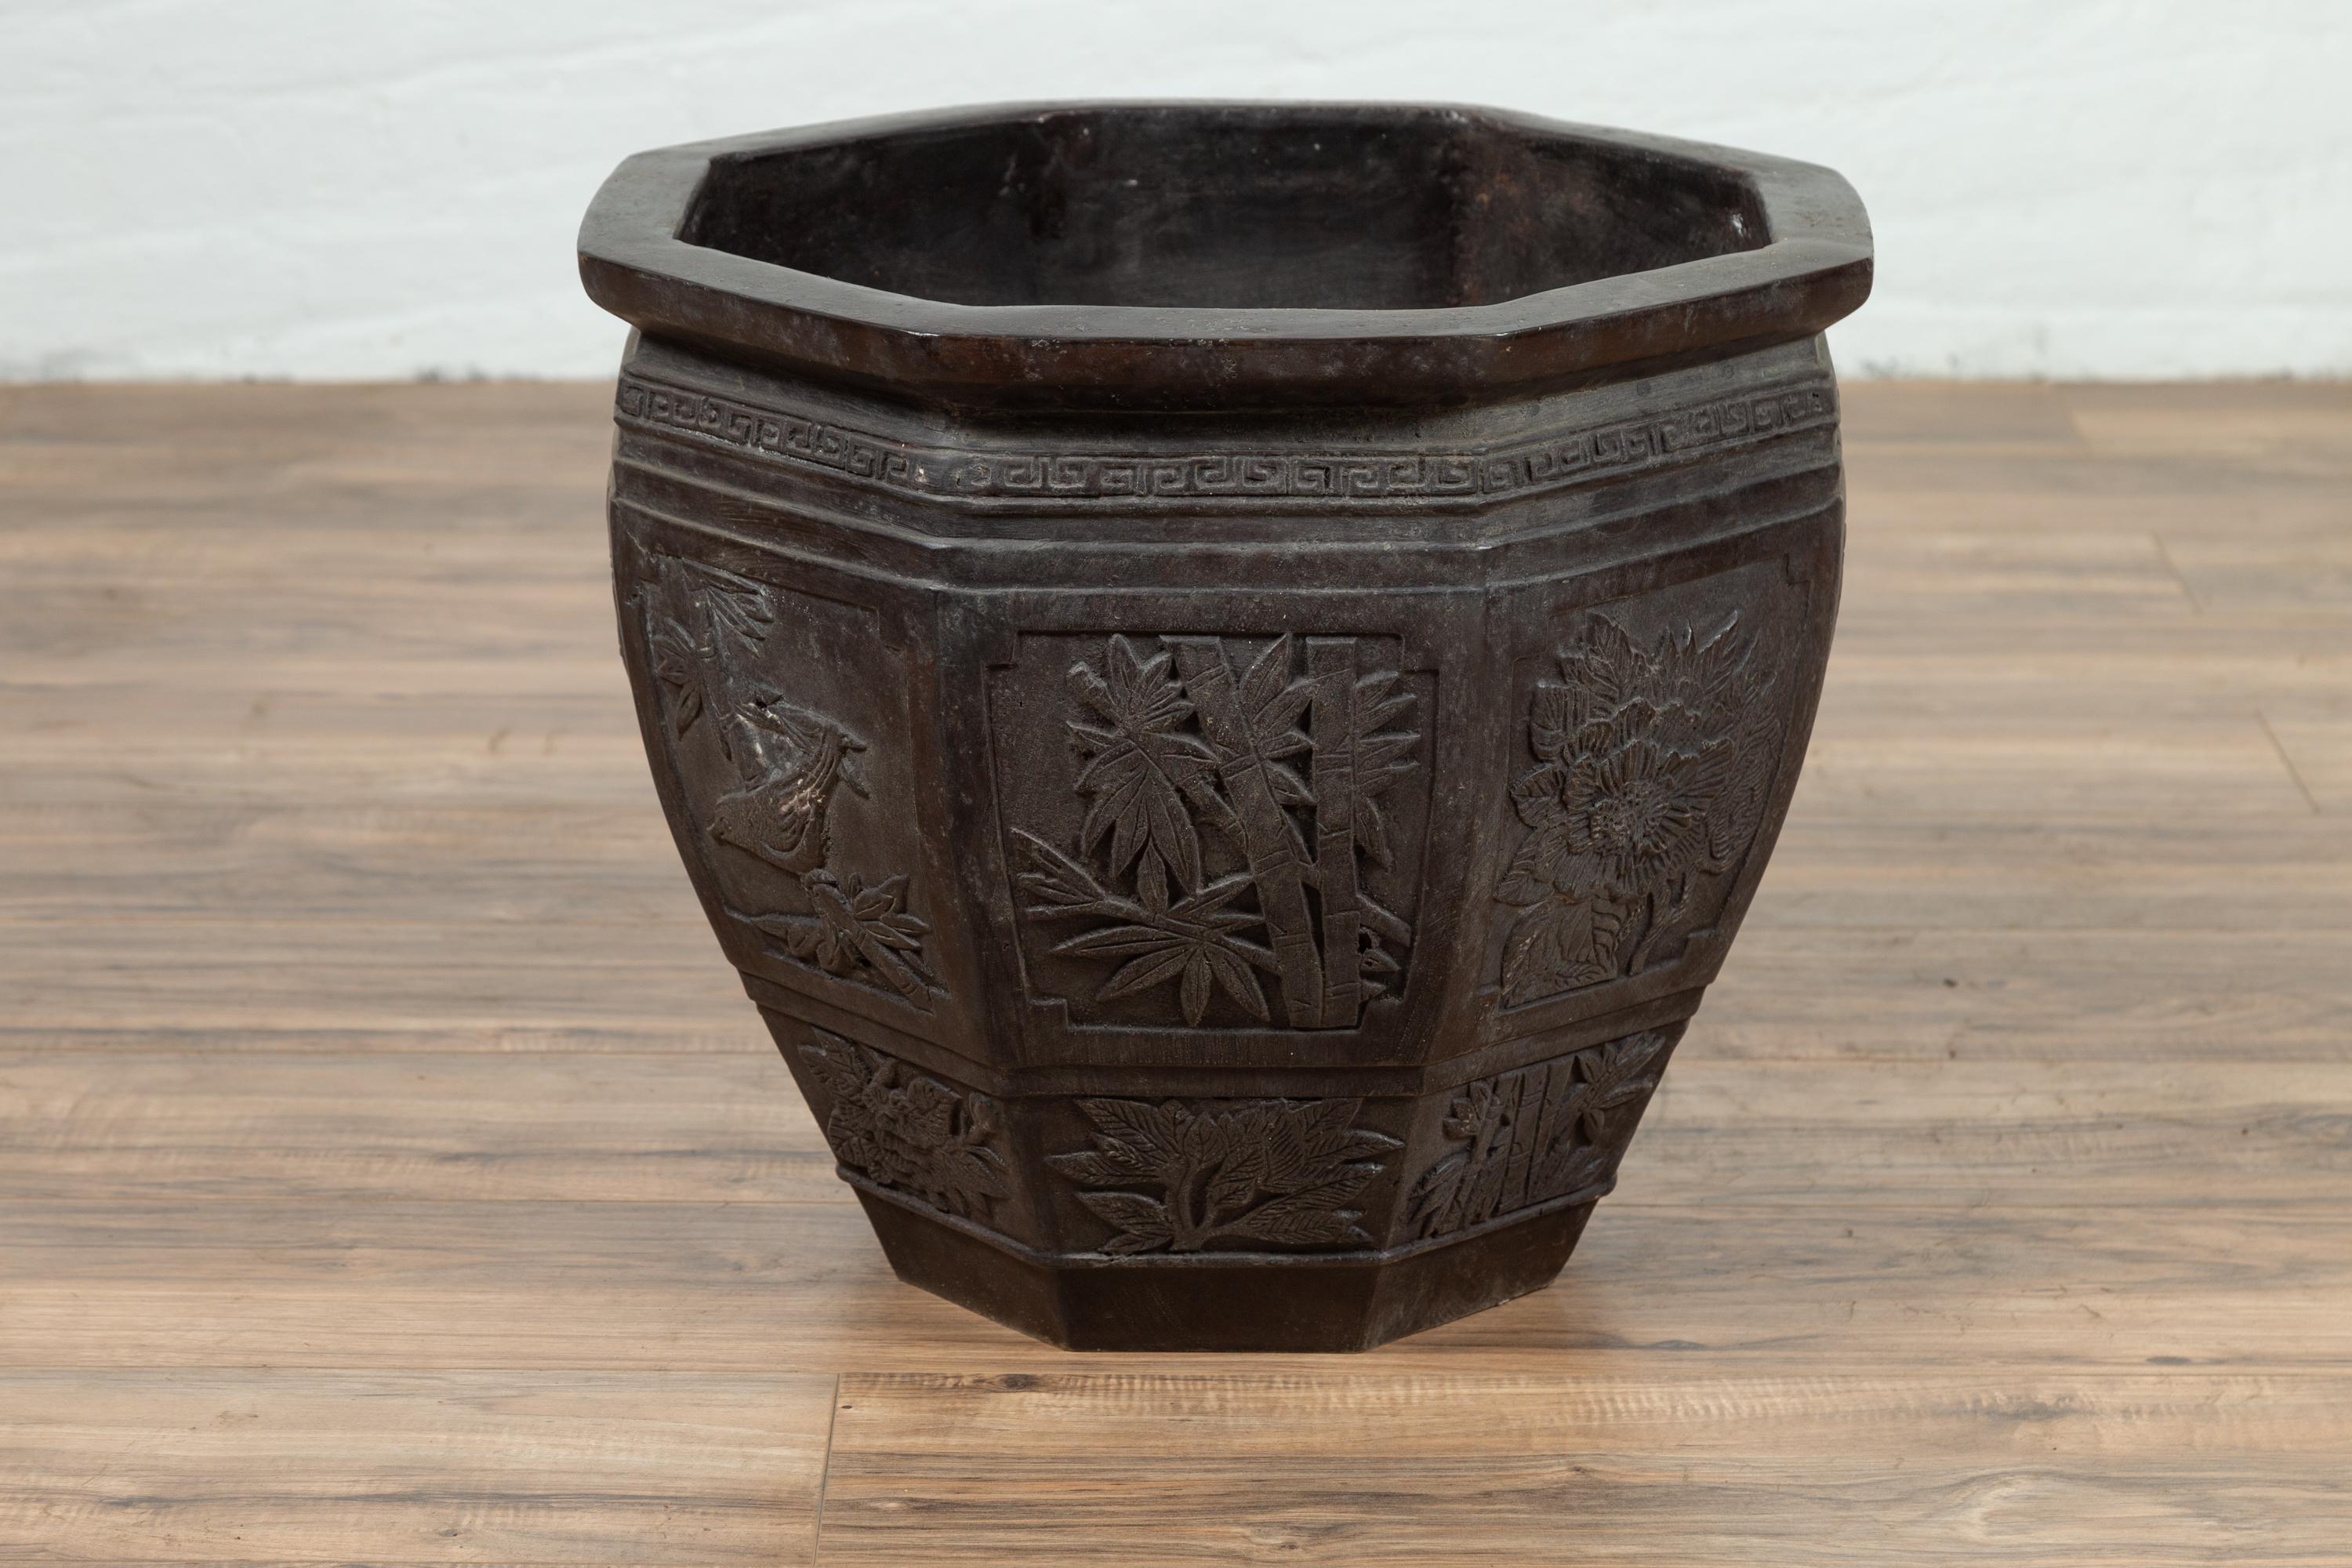 Vintage Asian Octagonal Bronze Planter with Floral, Foliage and Bird Motifs 8